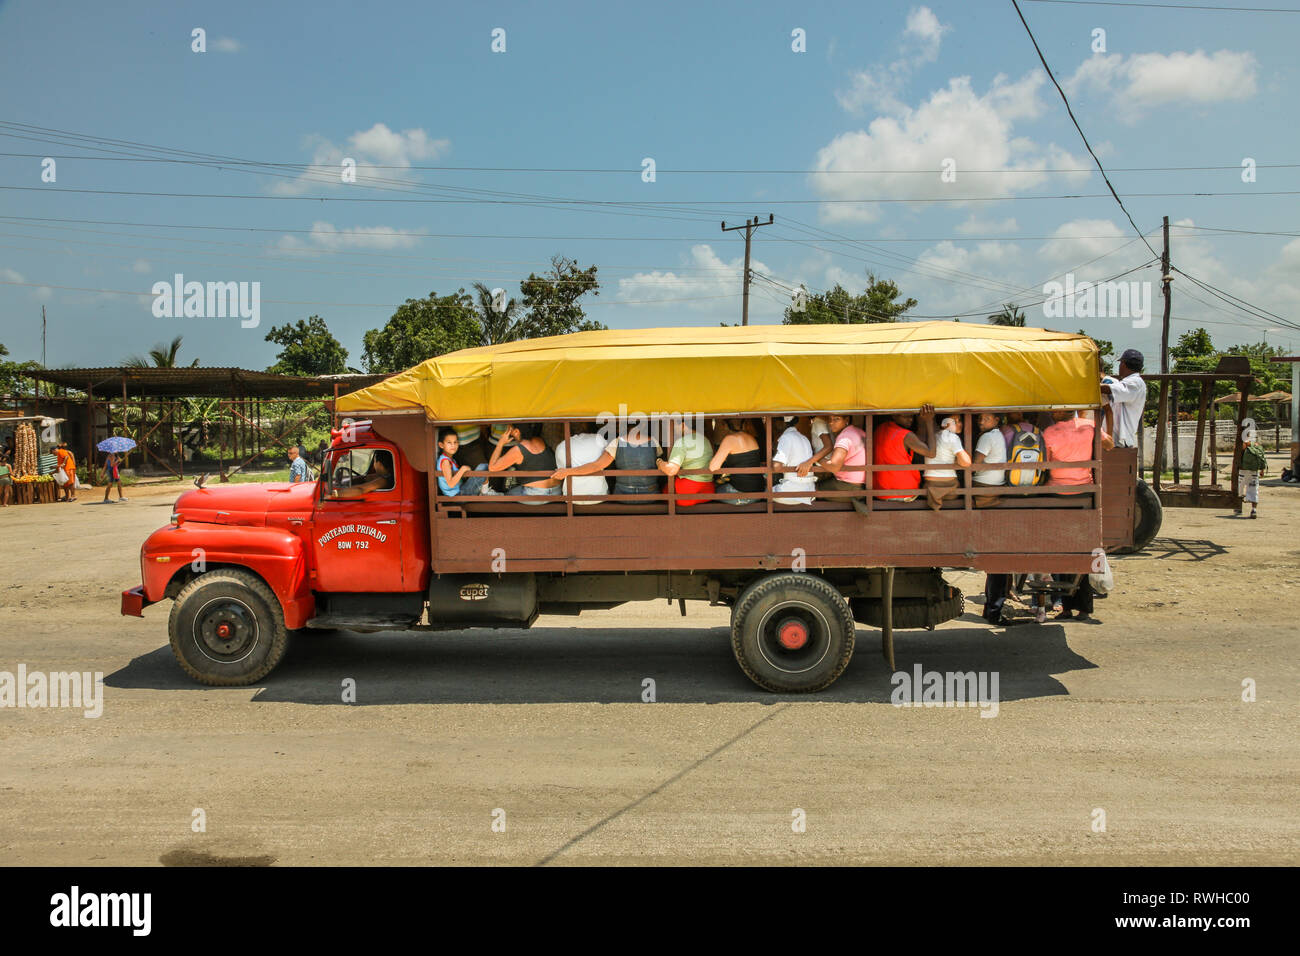 San Cristóbal, Cuba. 29th May, 2009. A private operated transport lorry picks up passengers in the town of San Cristóbal, Cuba Stock Photo